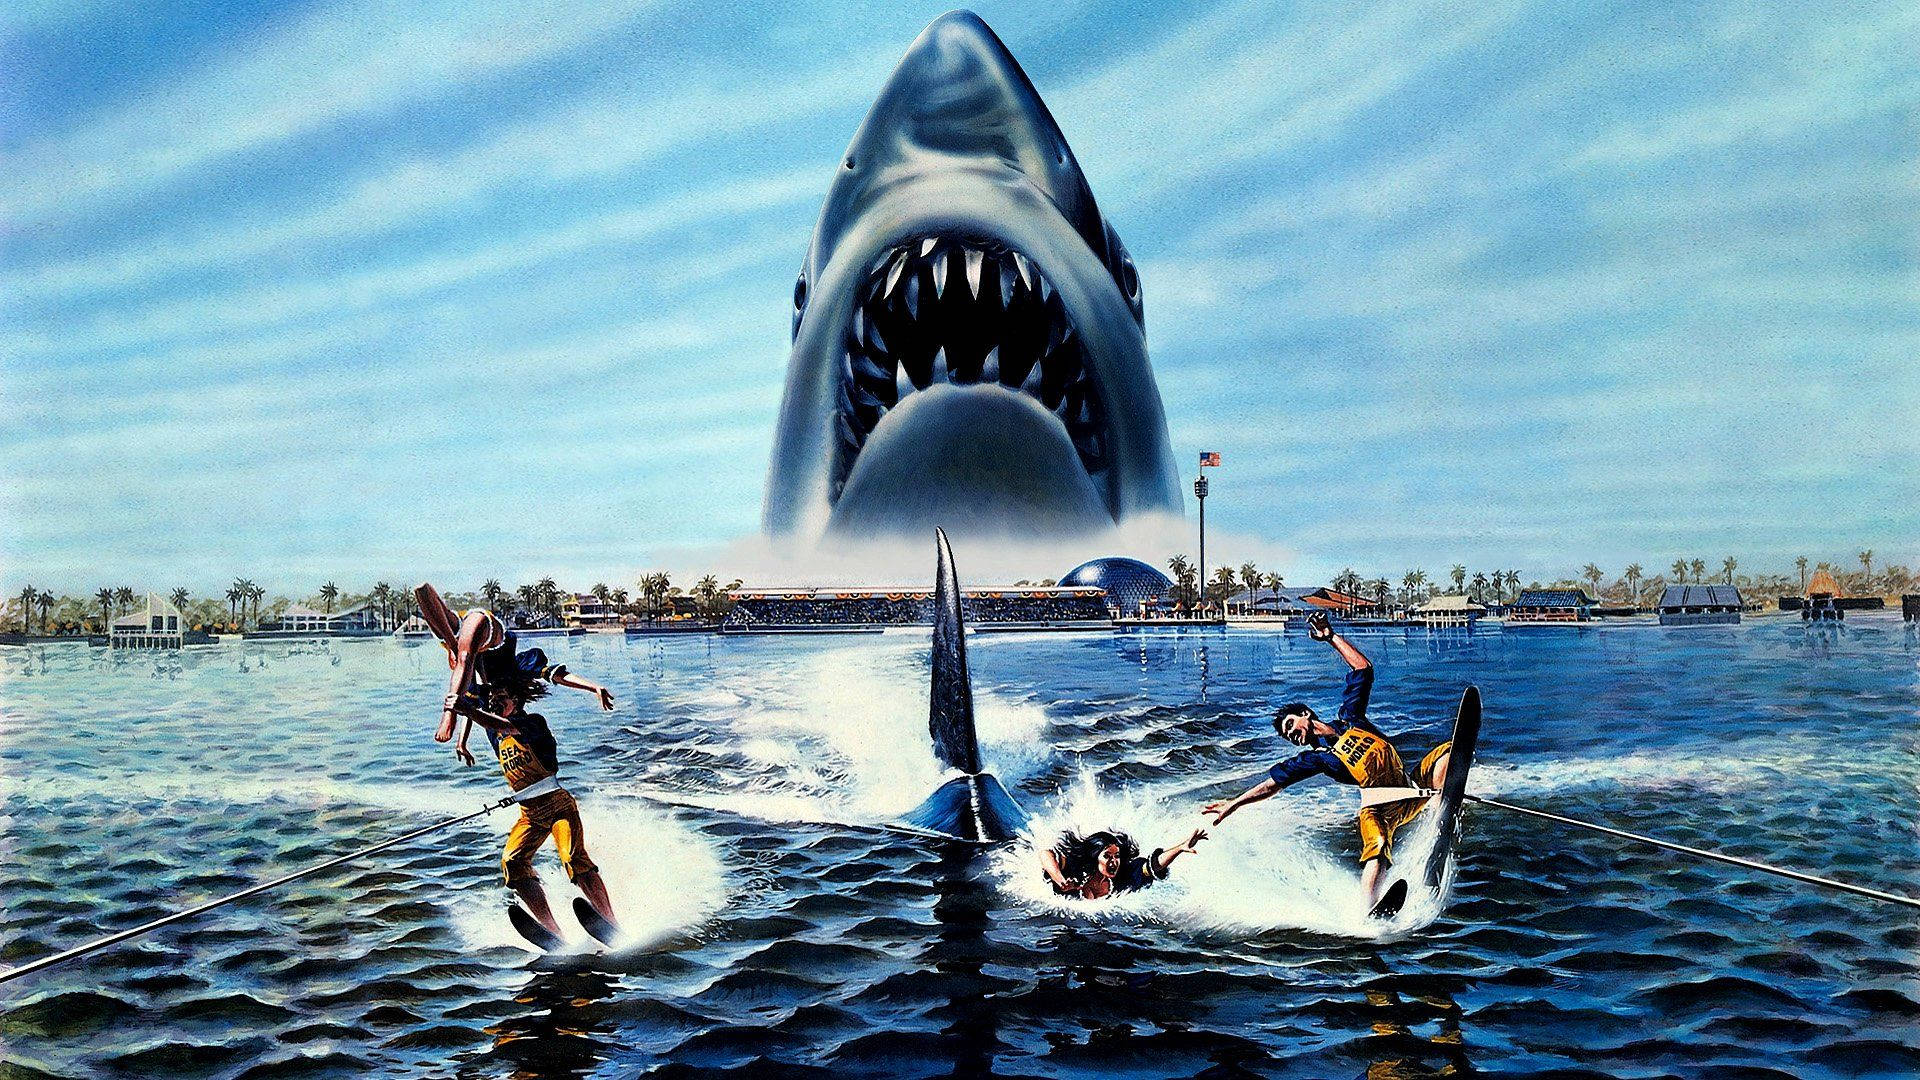 Jaws 3 the Movie Wallpaper